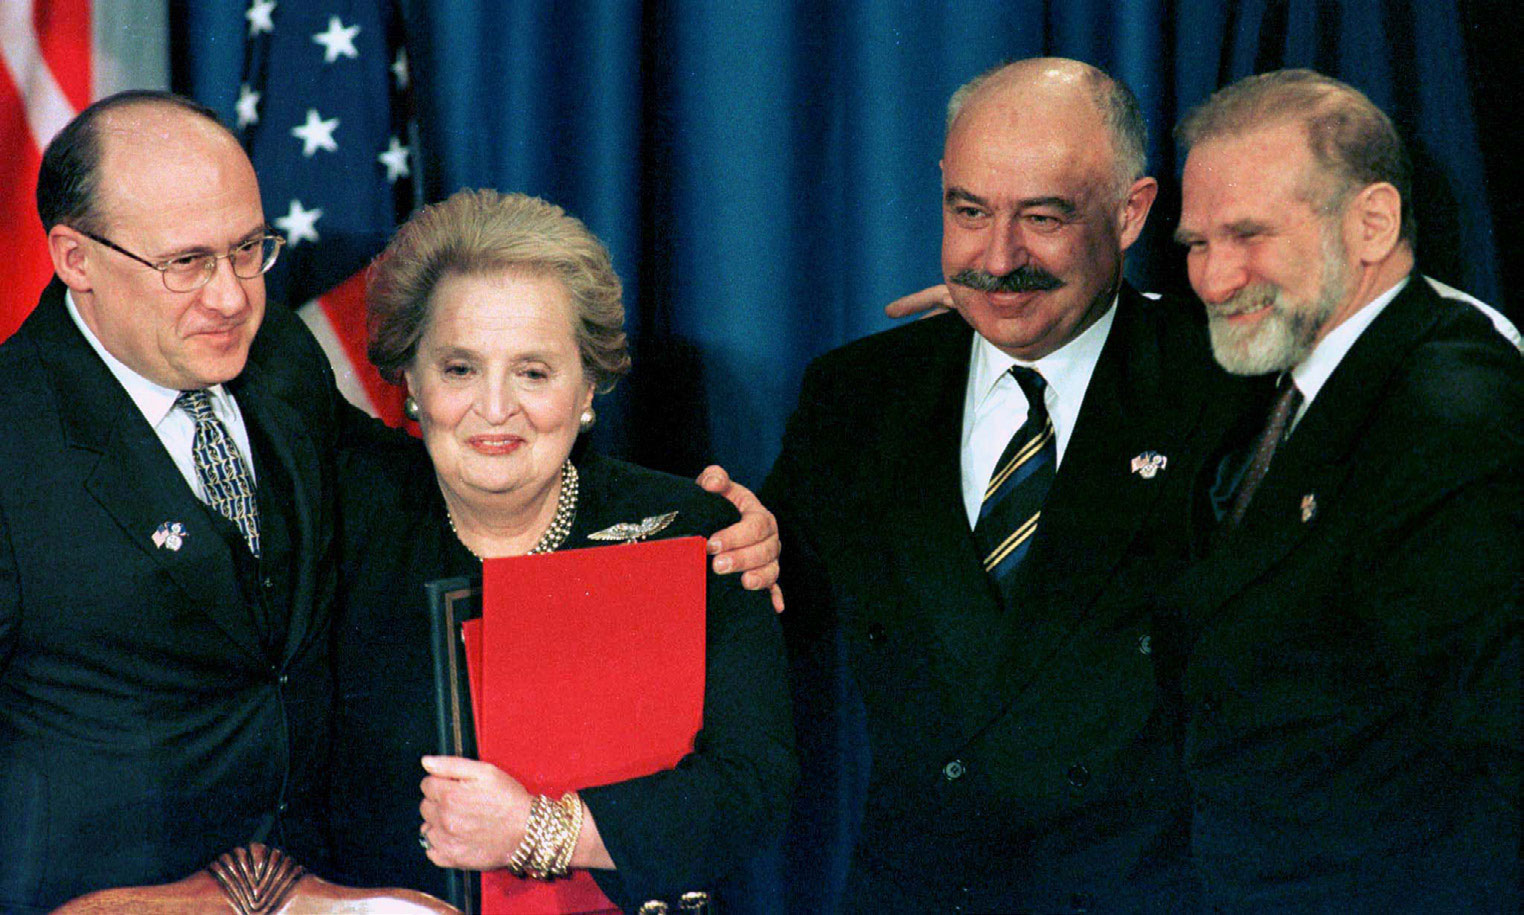 US Secretary of State Madeleine Albright with the foreign ministers of the Czech Republic, Hungary, and Poland in Independence, Missouri